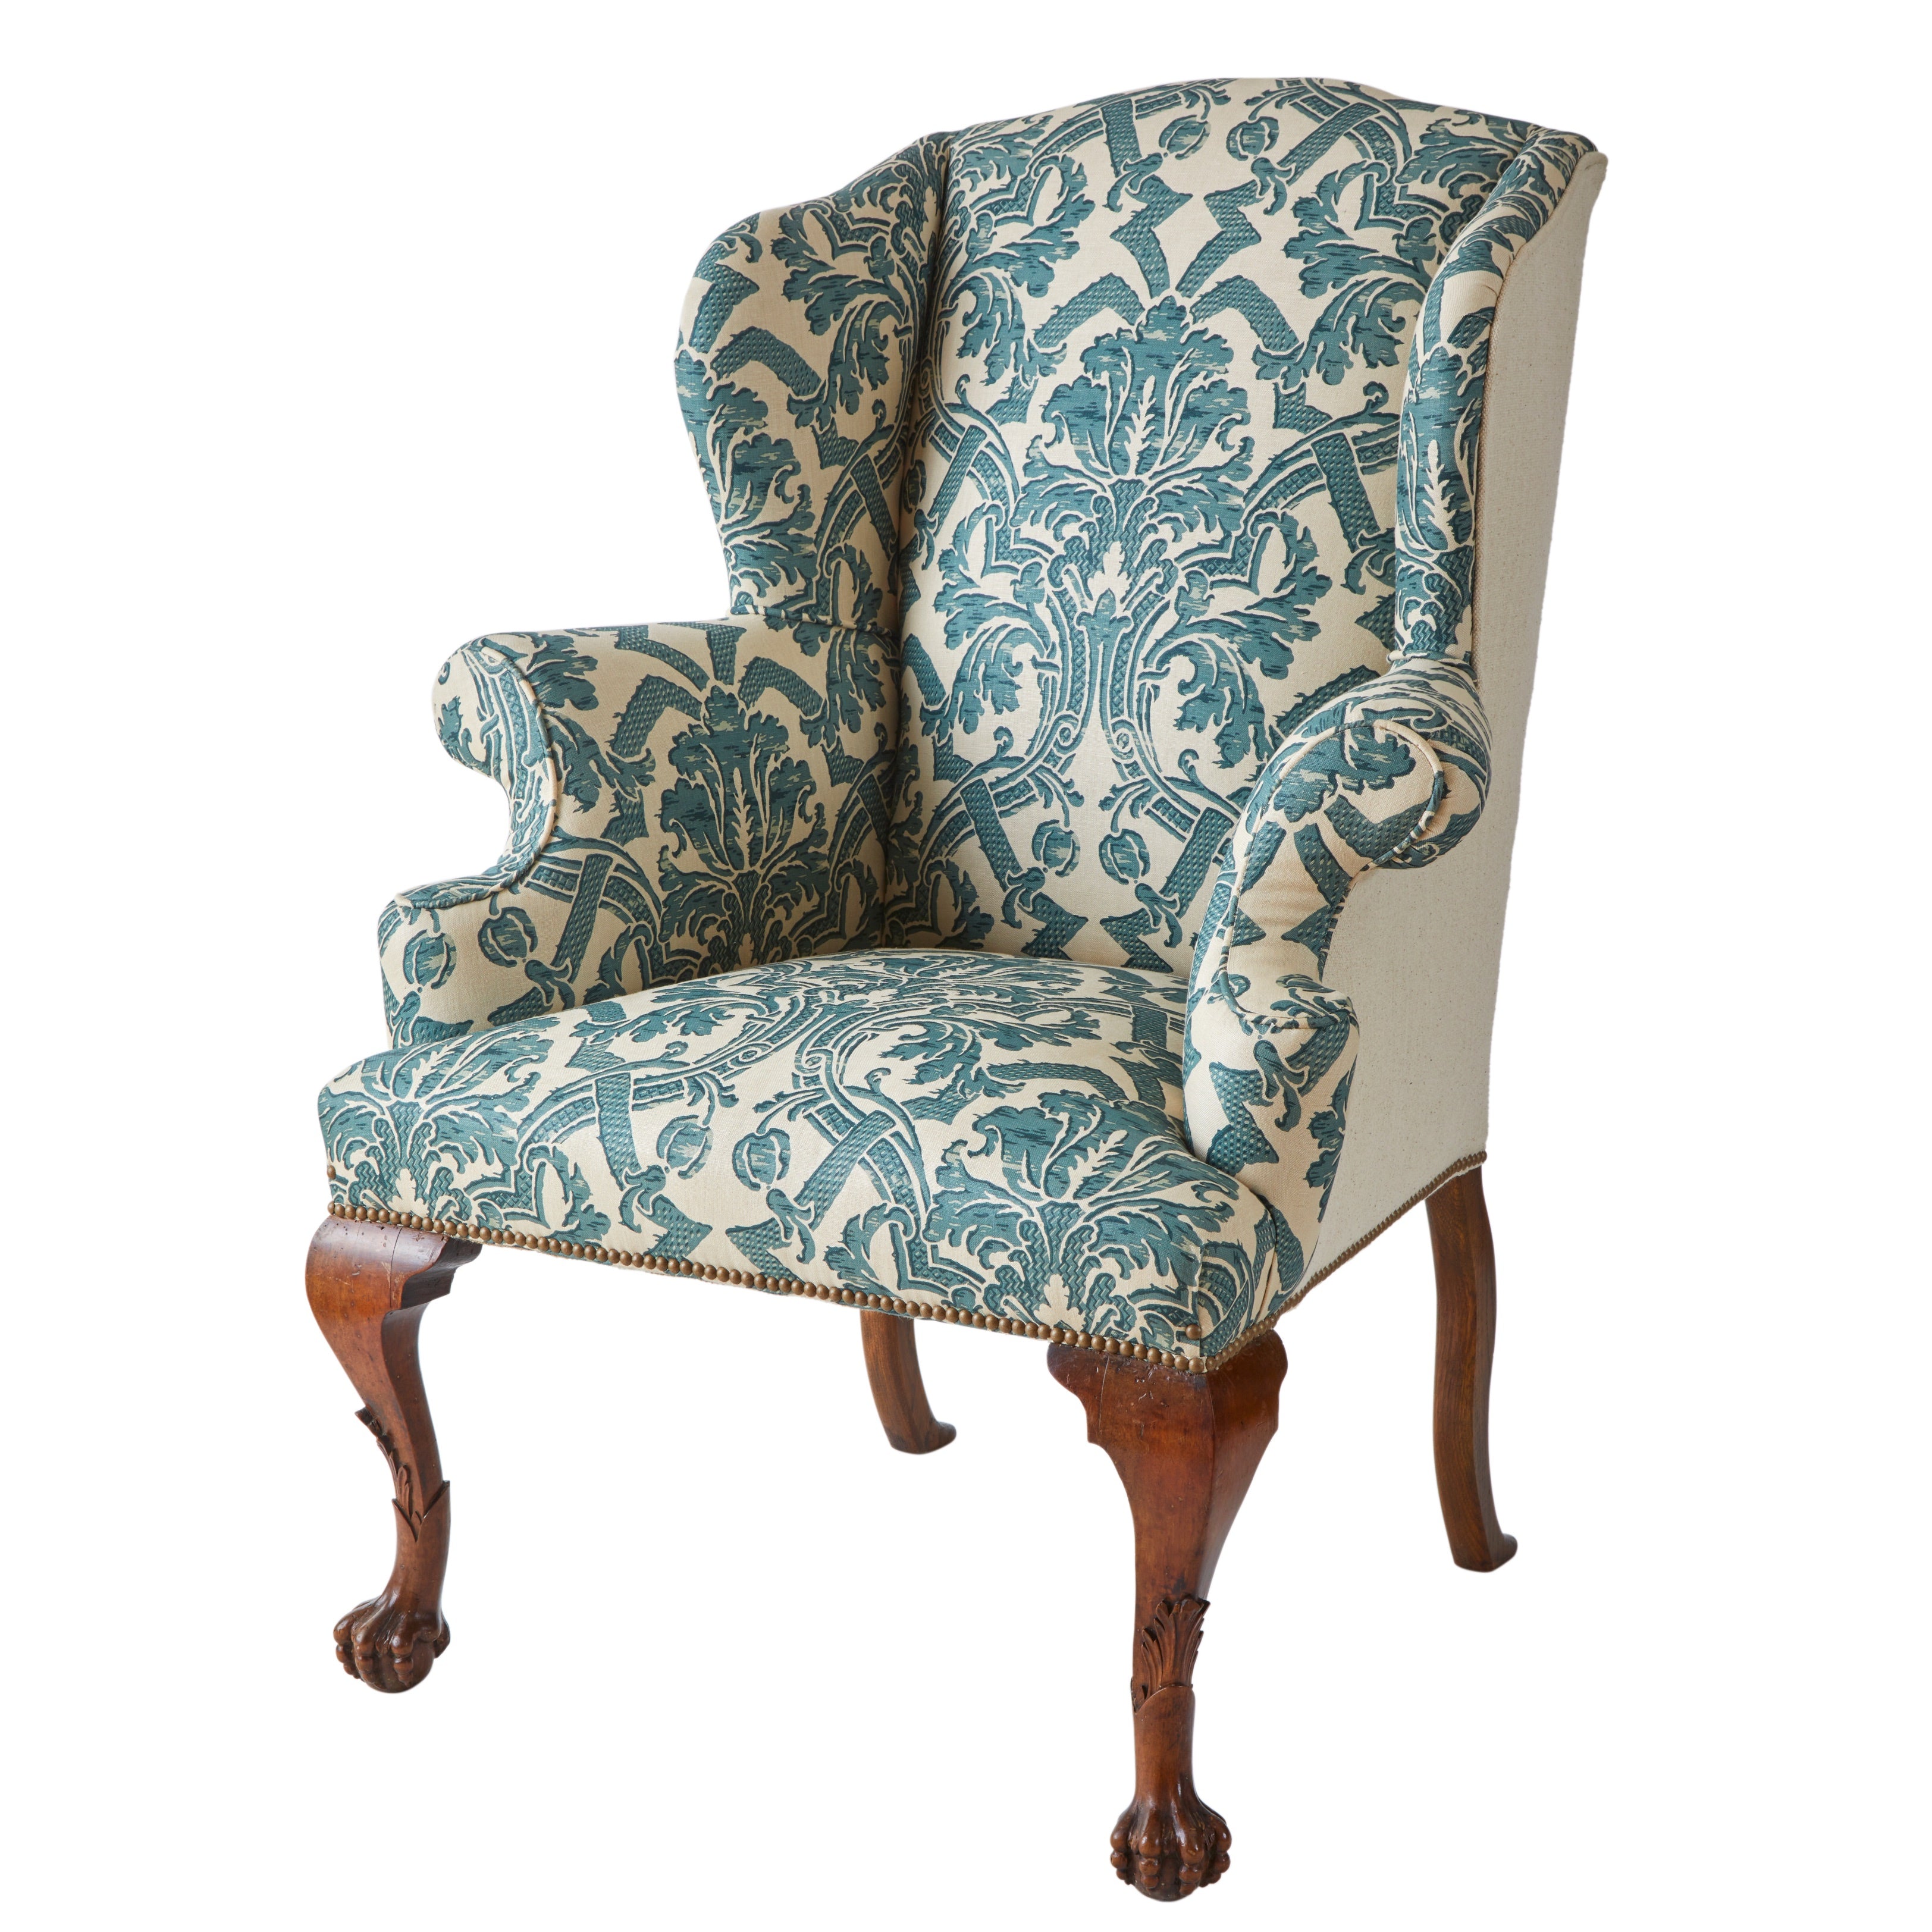 A George II Style Wing Back Chair in Flora Soames Stockton Linen